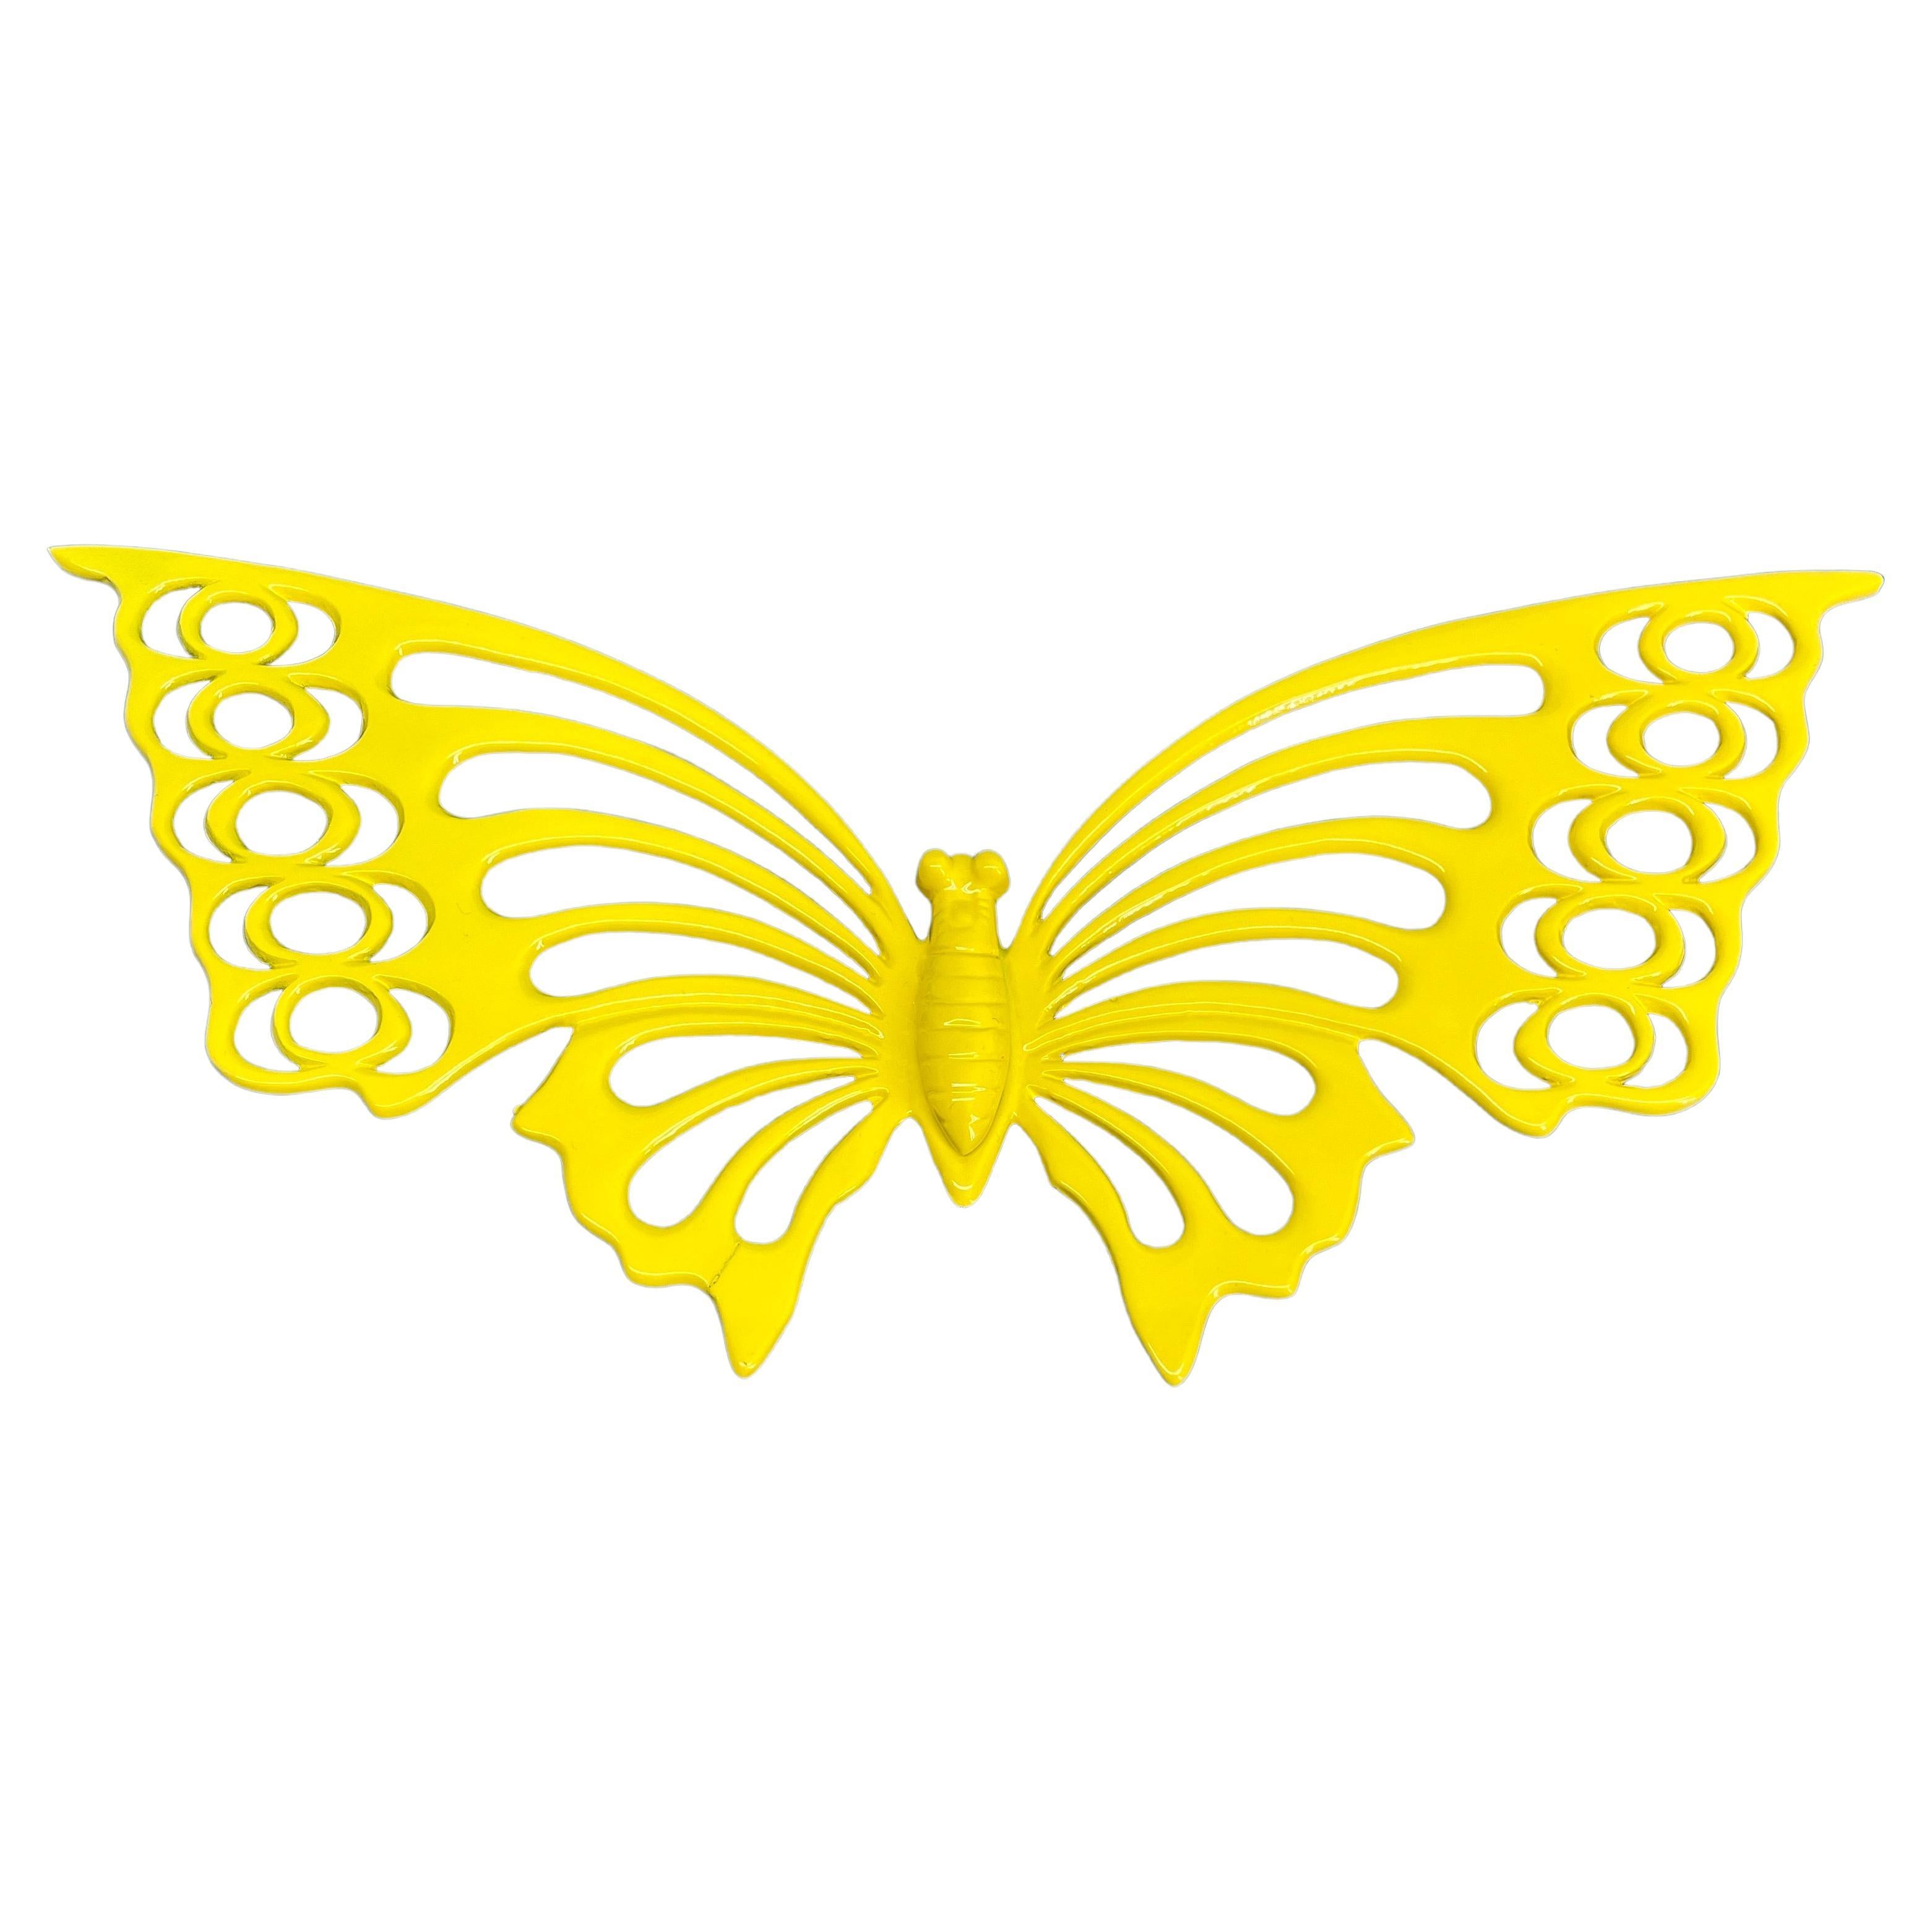 Large Brass Midcentury Butterfly Sculpture in Bright Yellow Powder-Coat